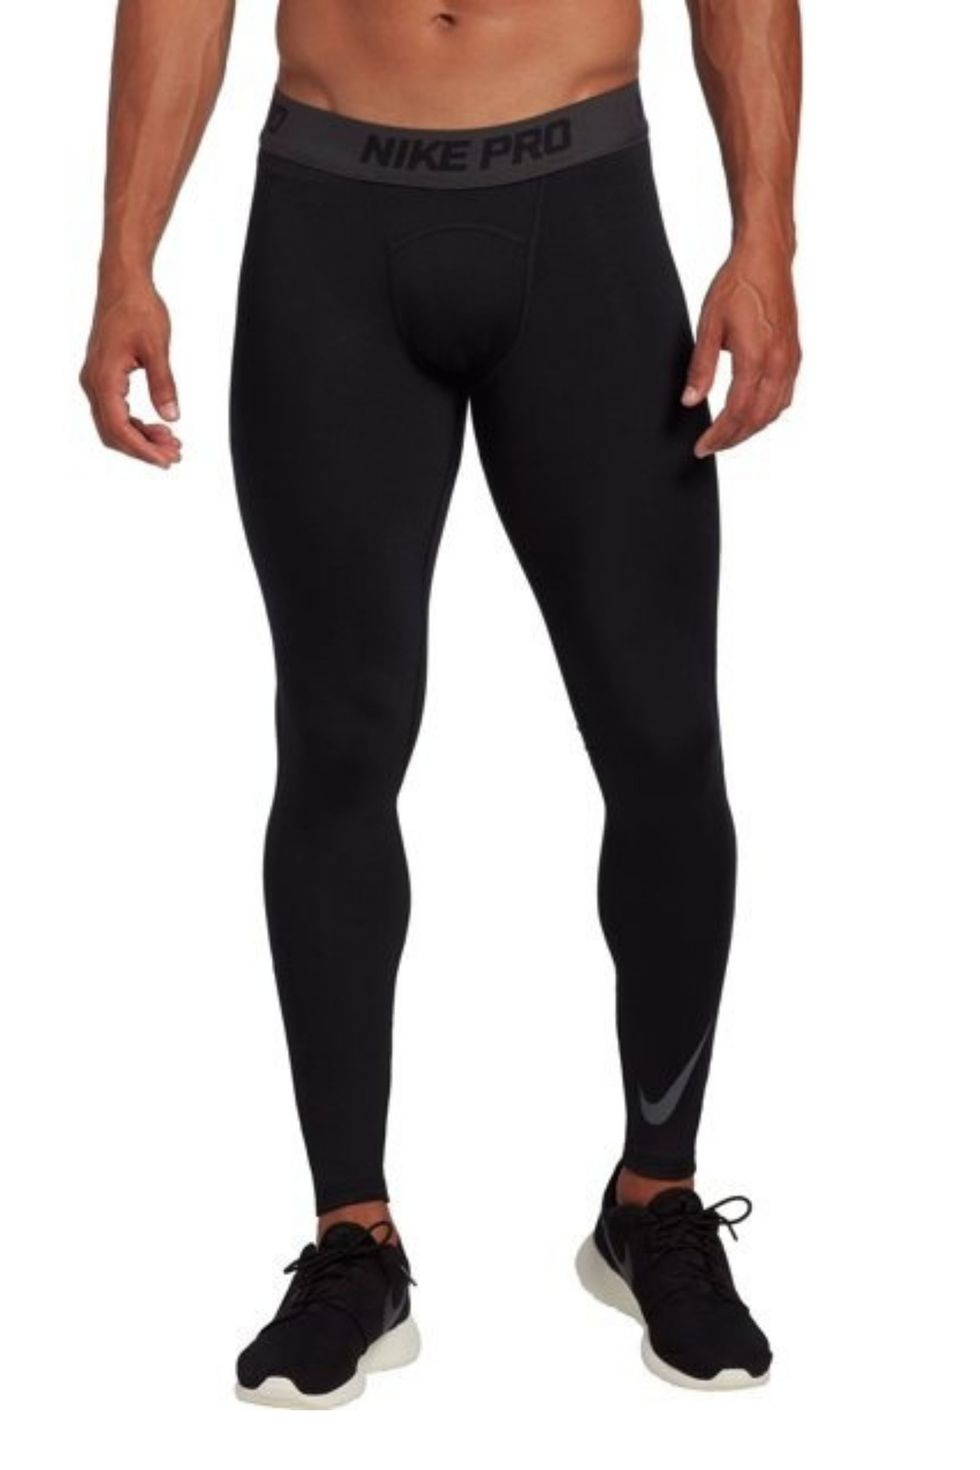 The 12 Best Men's Leggings, Tights and Compression Pants for